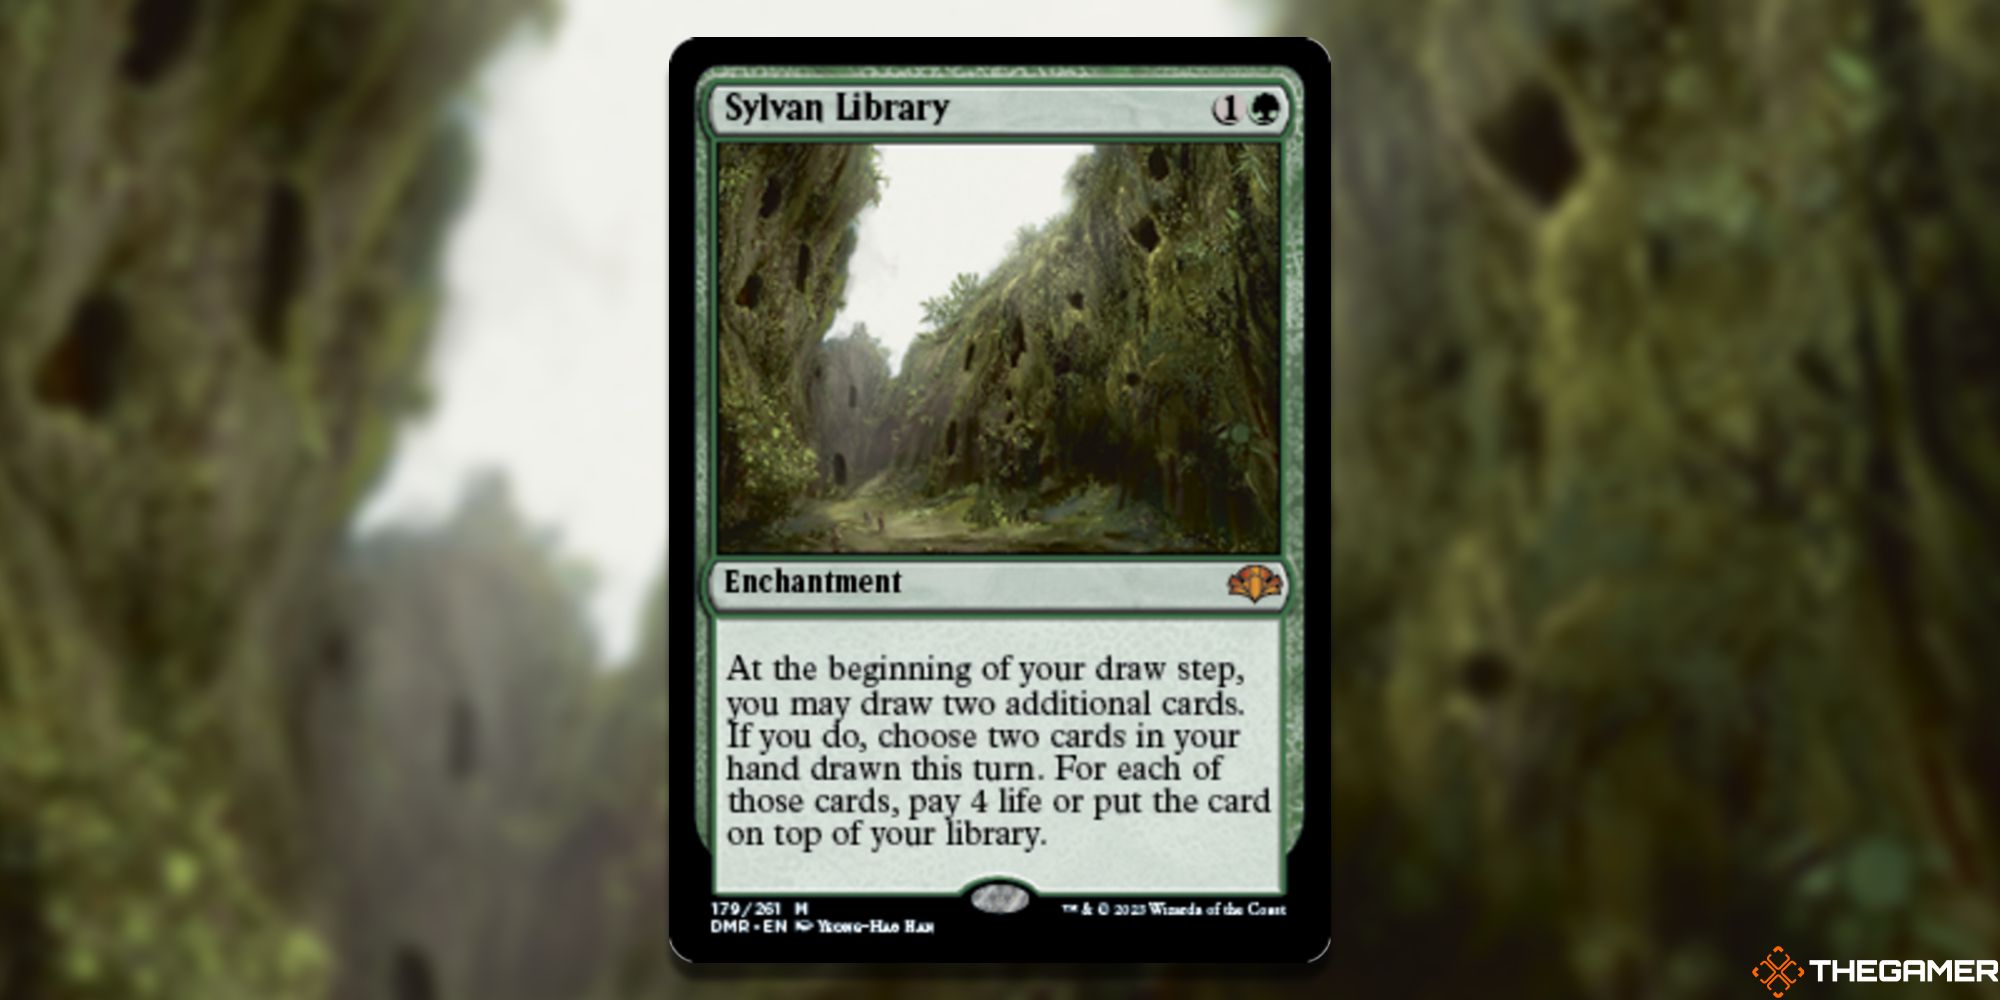  Image of the Sylvan Library card in Magic: The Gathering, with art by Bryan Sola